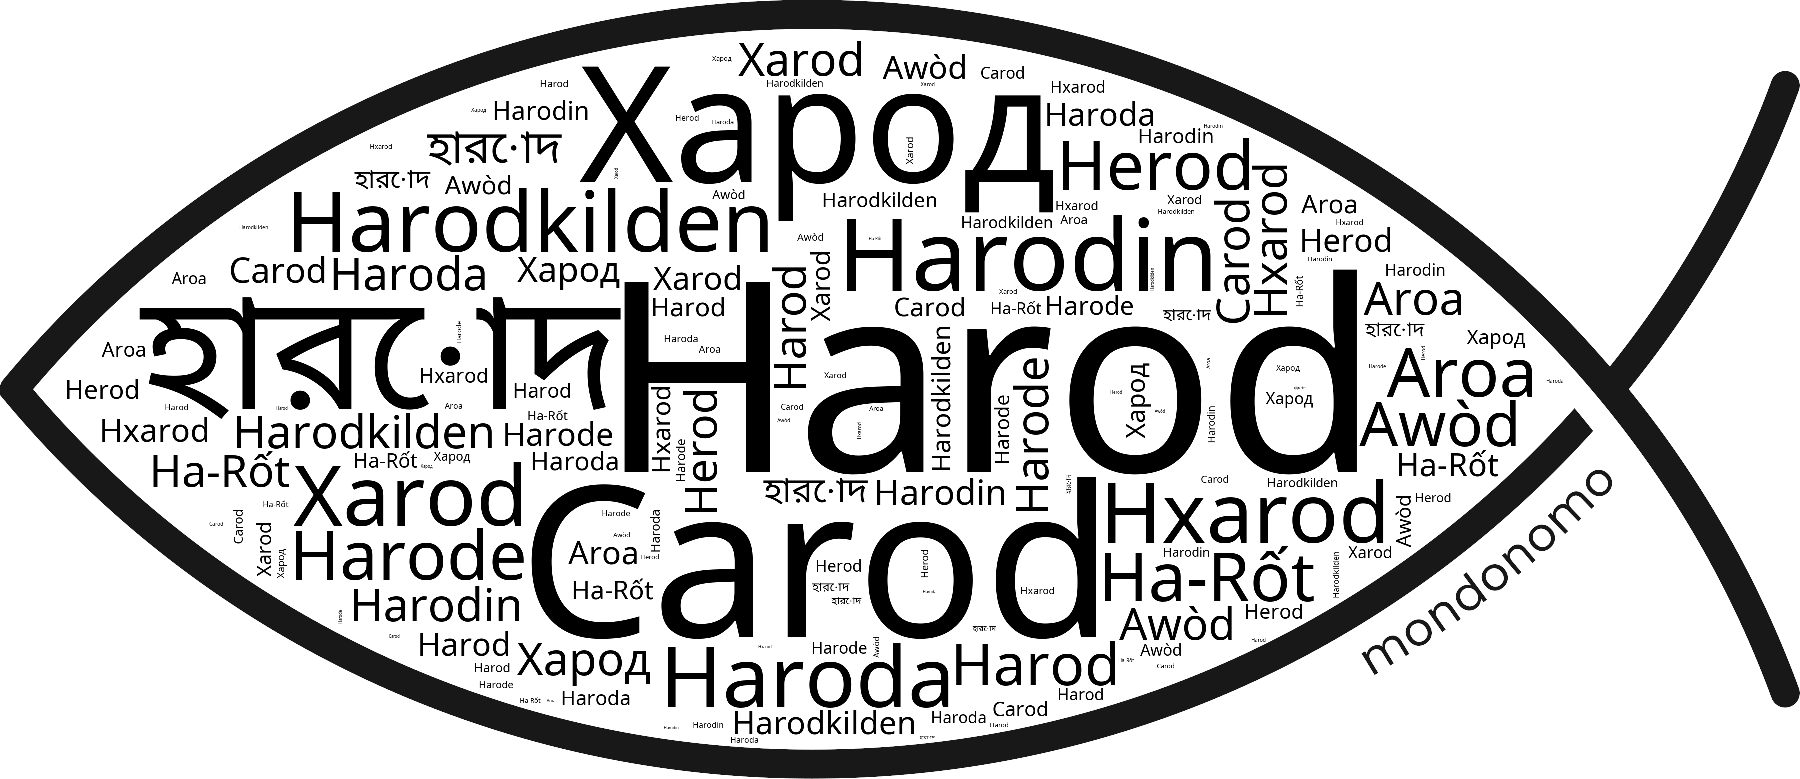 Name Harod in the world's Bibles